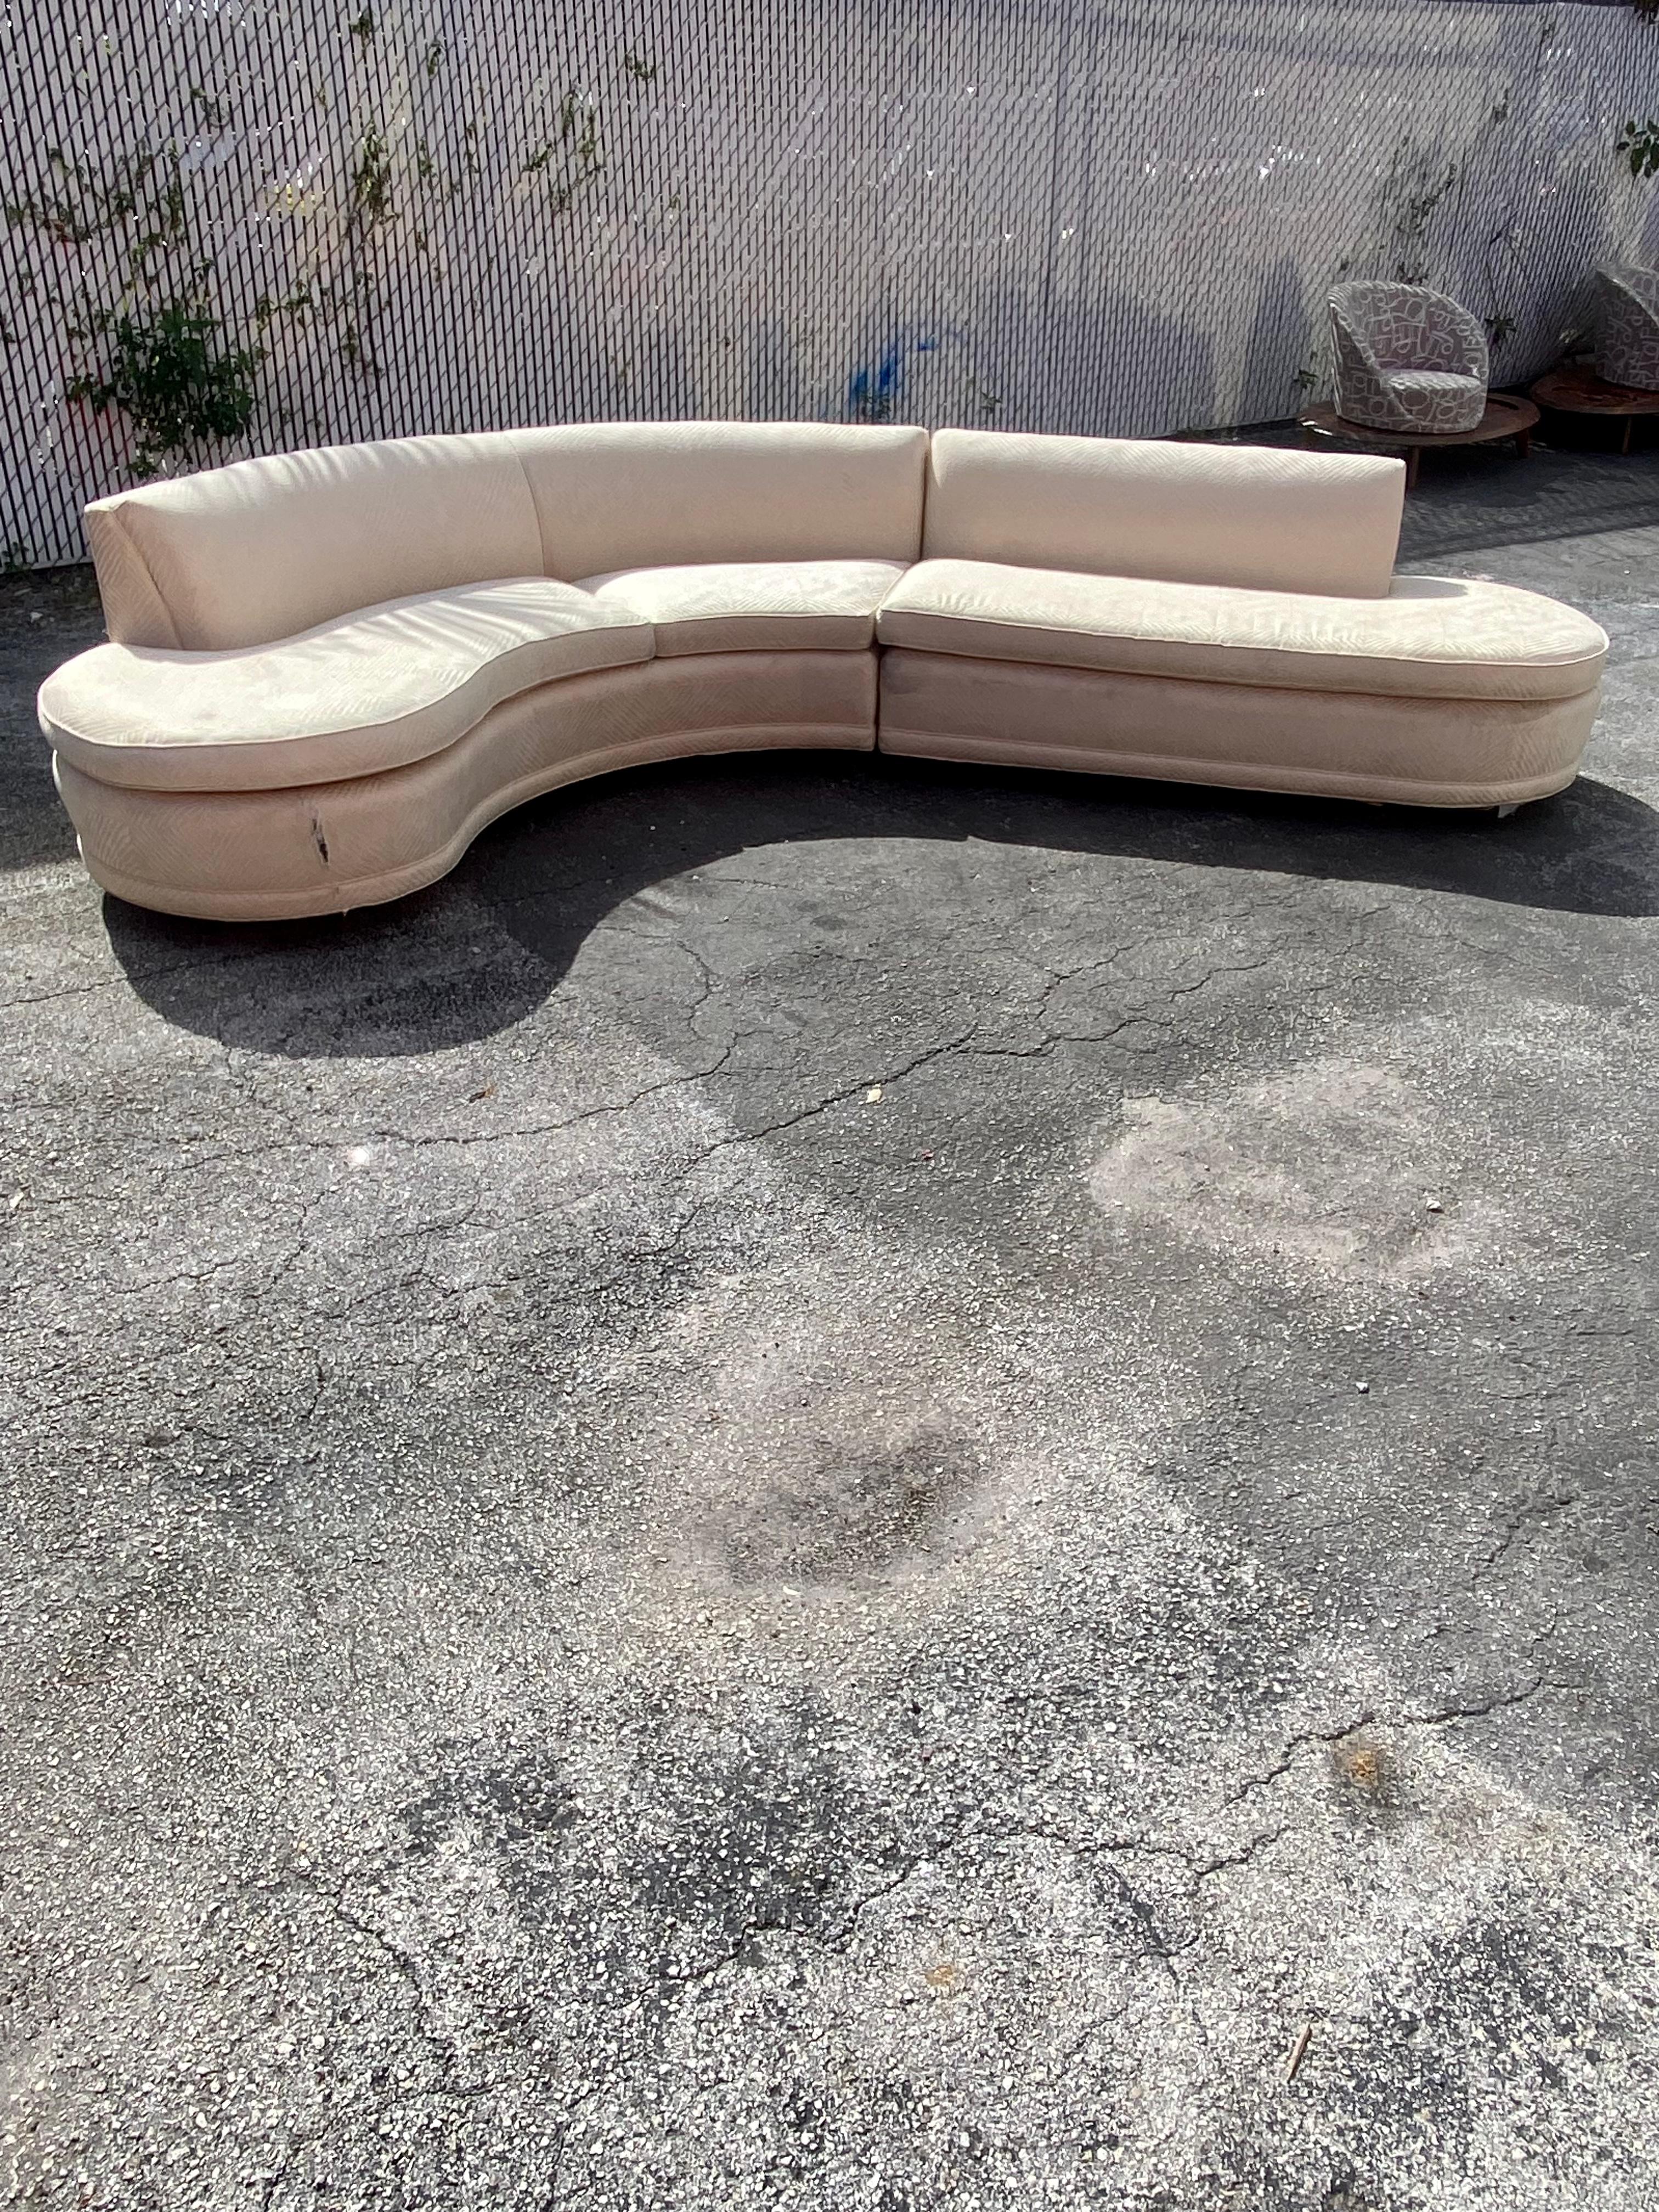 On offer on this occasion is one of the most stunning, serpentine sectional you could hope to find. Outstanding design is exhibited throughout. The beautiful sectional is statement piece which is also extremely comfortable and packed with